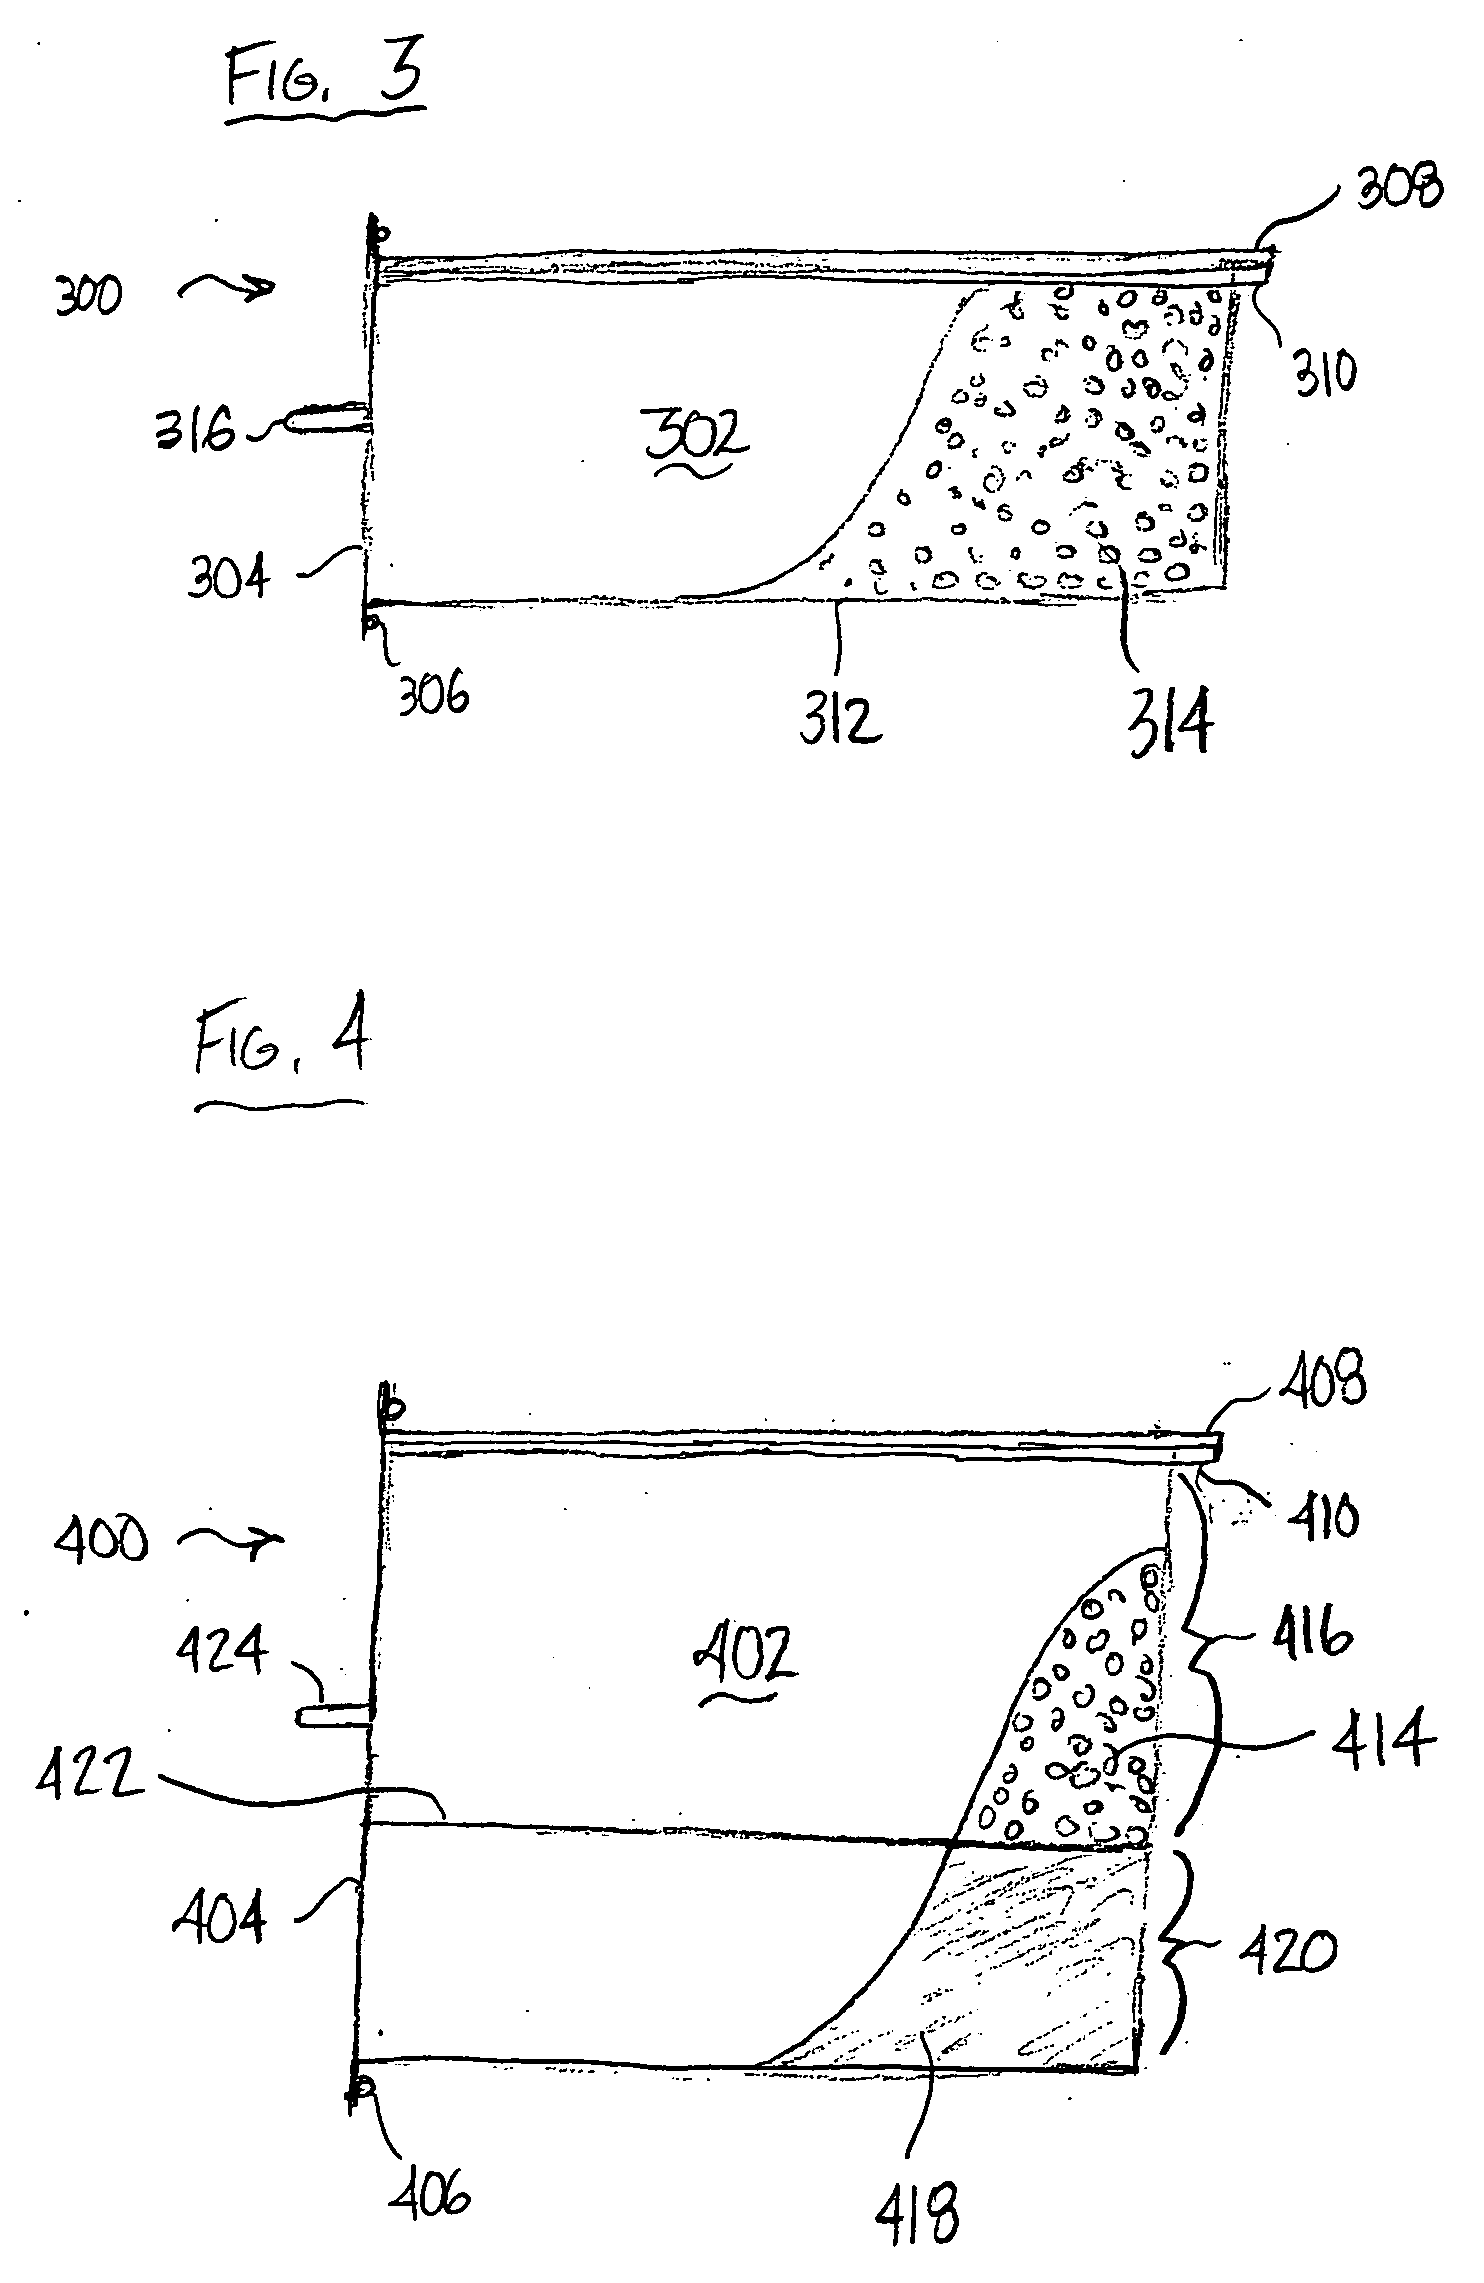 Under-sink Apparatus for Target Pharmaceutical Compound Treatment